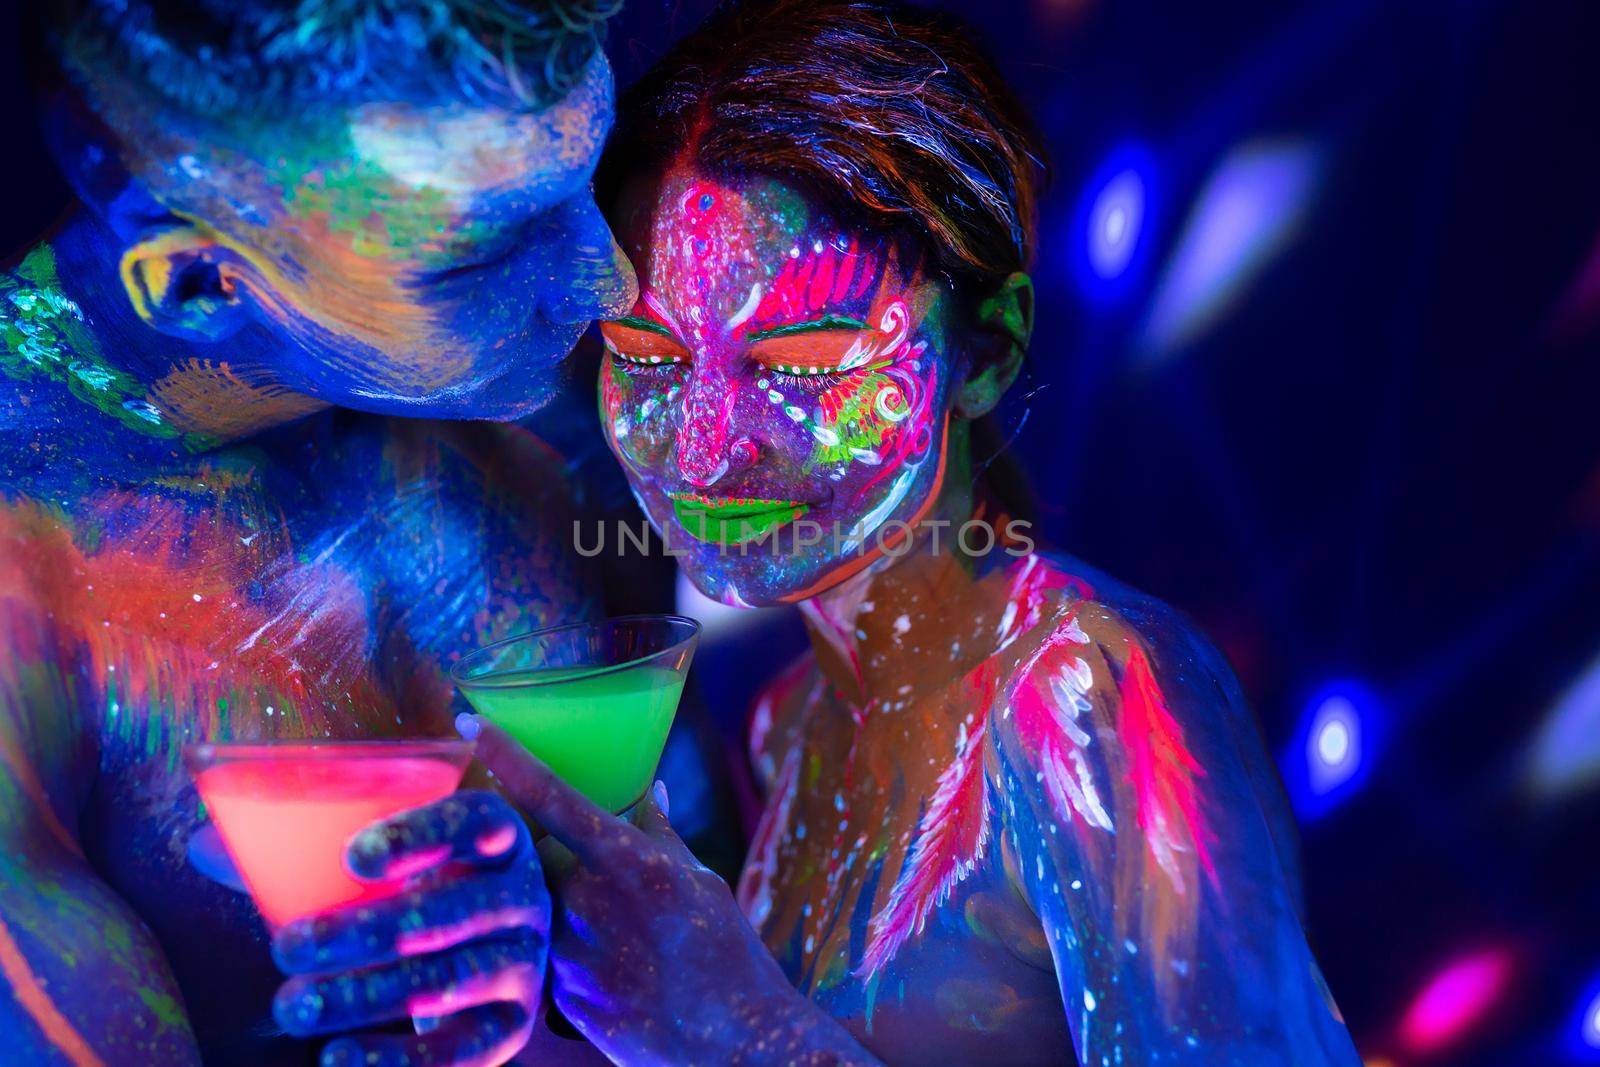 Young couple drink an alcoholic drink in a nightclub. Man and woman with fluorescent bodyart